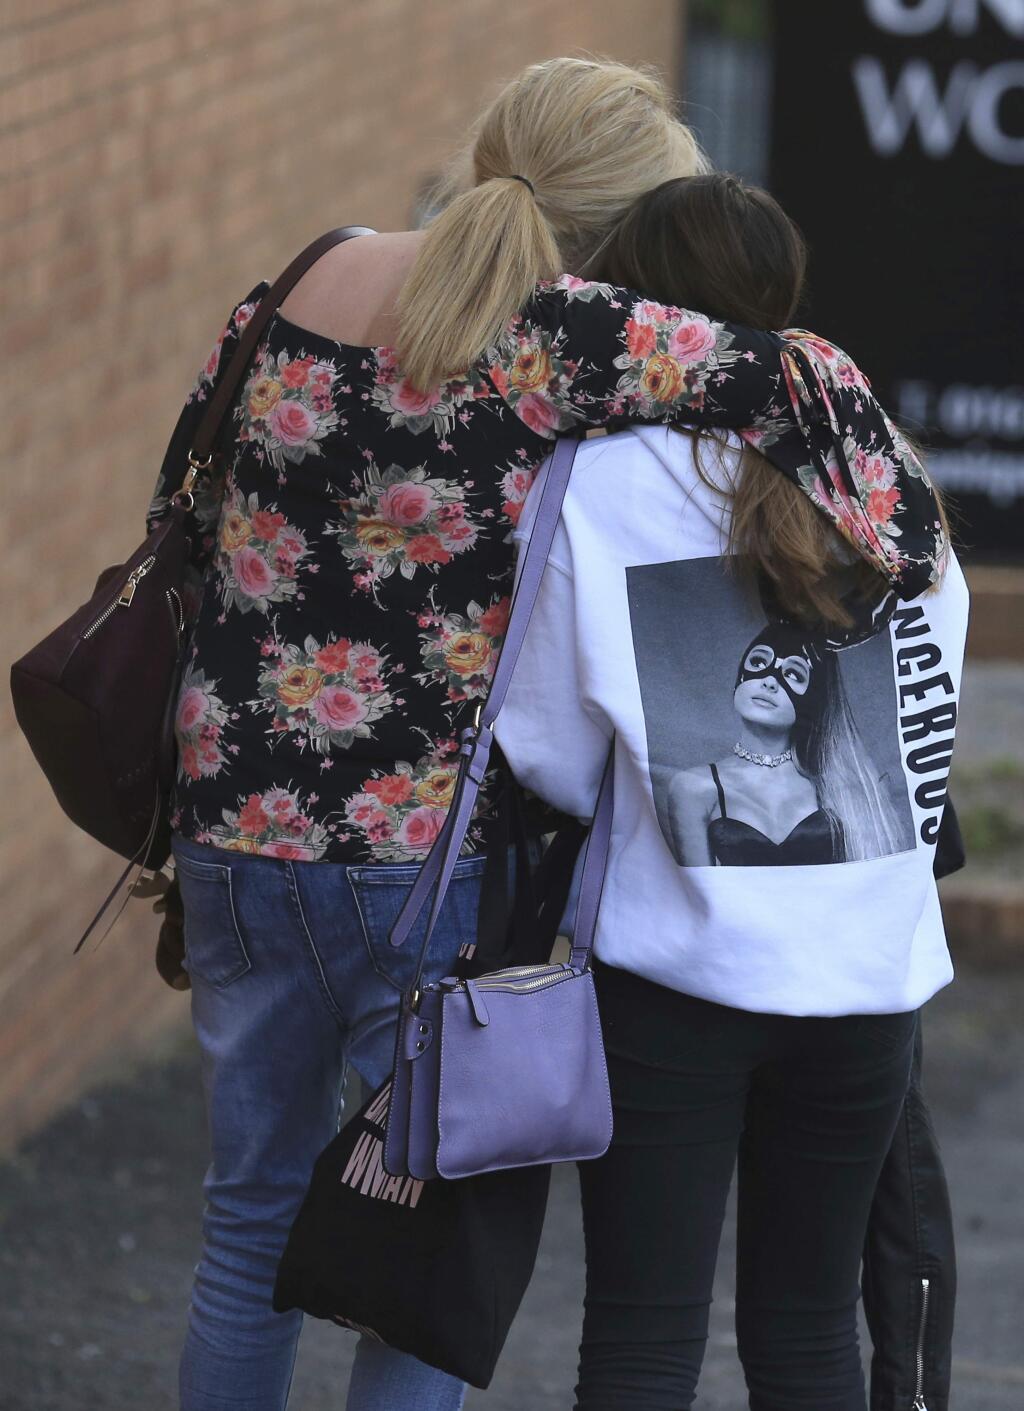 A fan is comforted as she leaves the Park Inn hotel in central Manchester, England Tuesday May 23 2017. Over a dozen of people were killed in an explosion following a Ariana Grande concert at the Manchester Arena late Monday evening. (AP Photo/Rui Vieira)